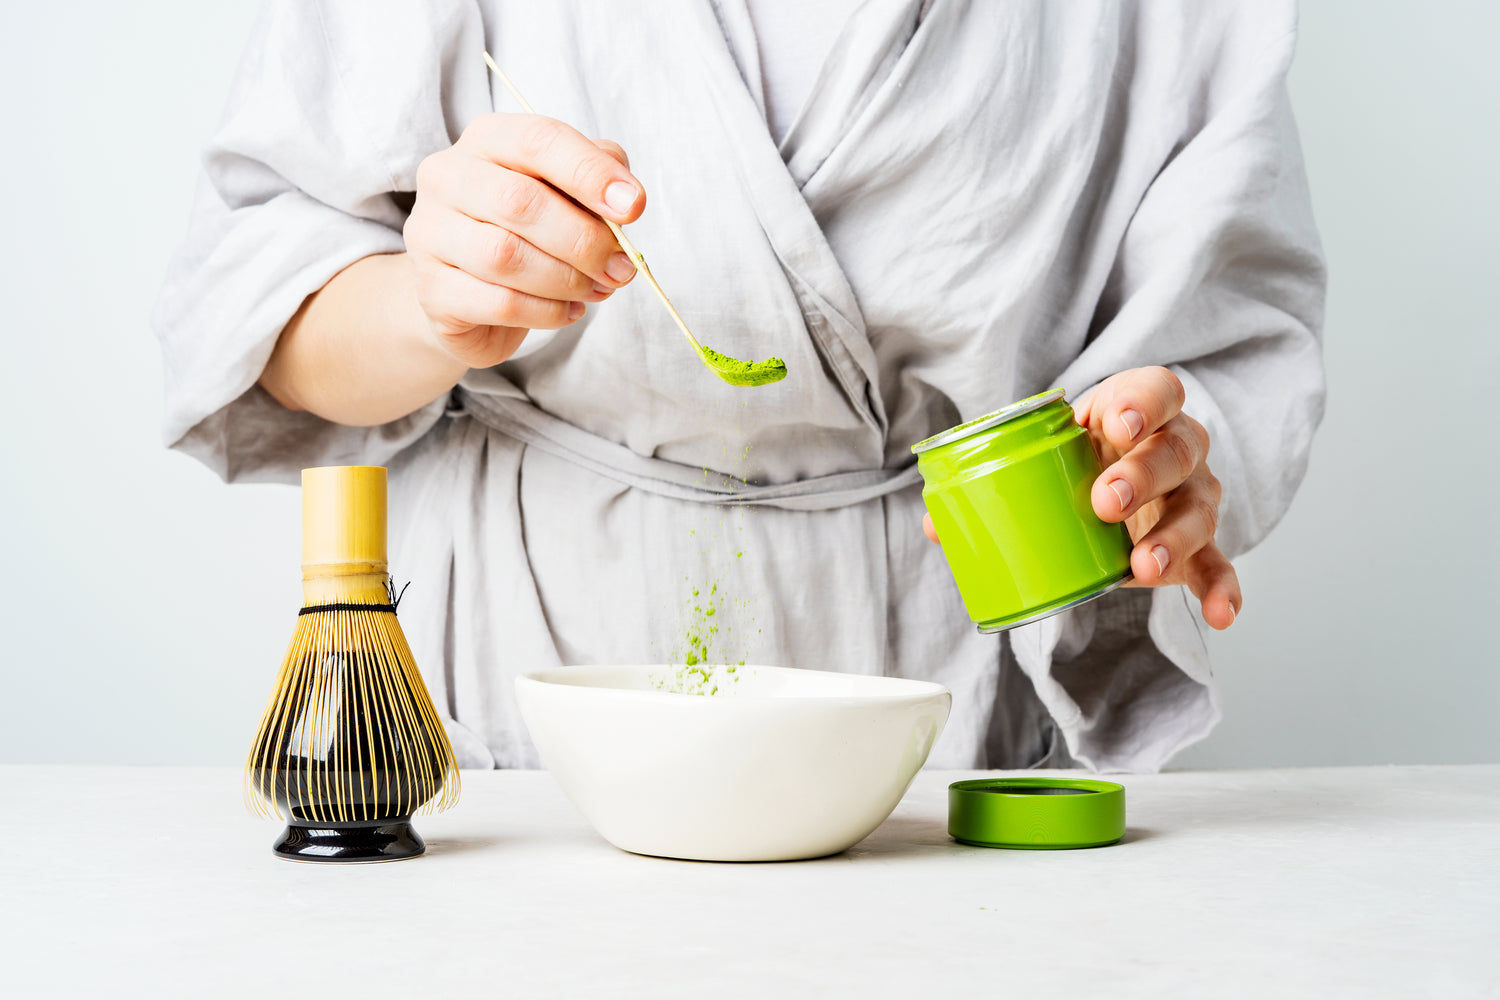 How To Whisk Matcha?